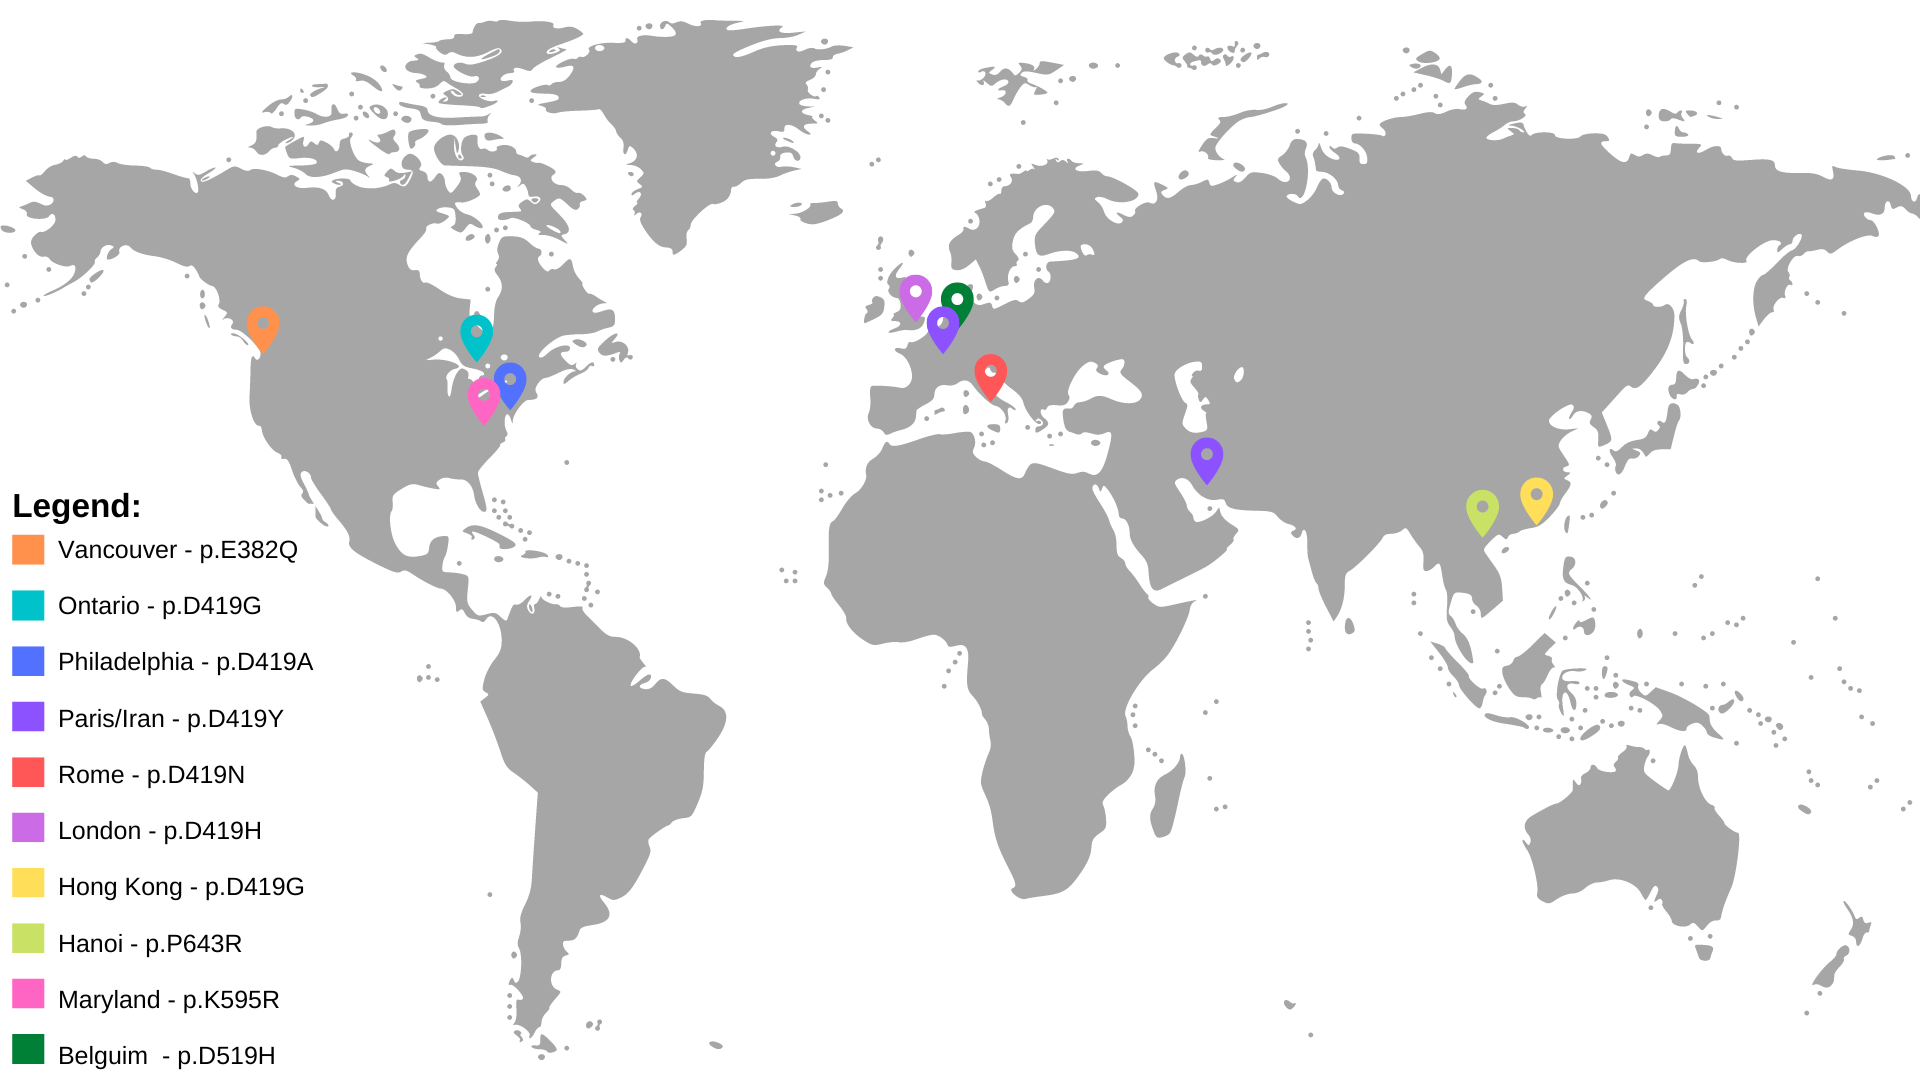 Map of the world showing location of STAT6 collaborators